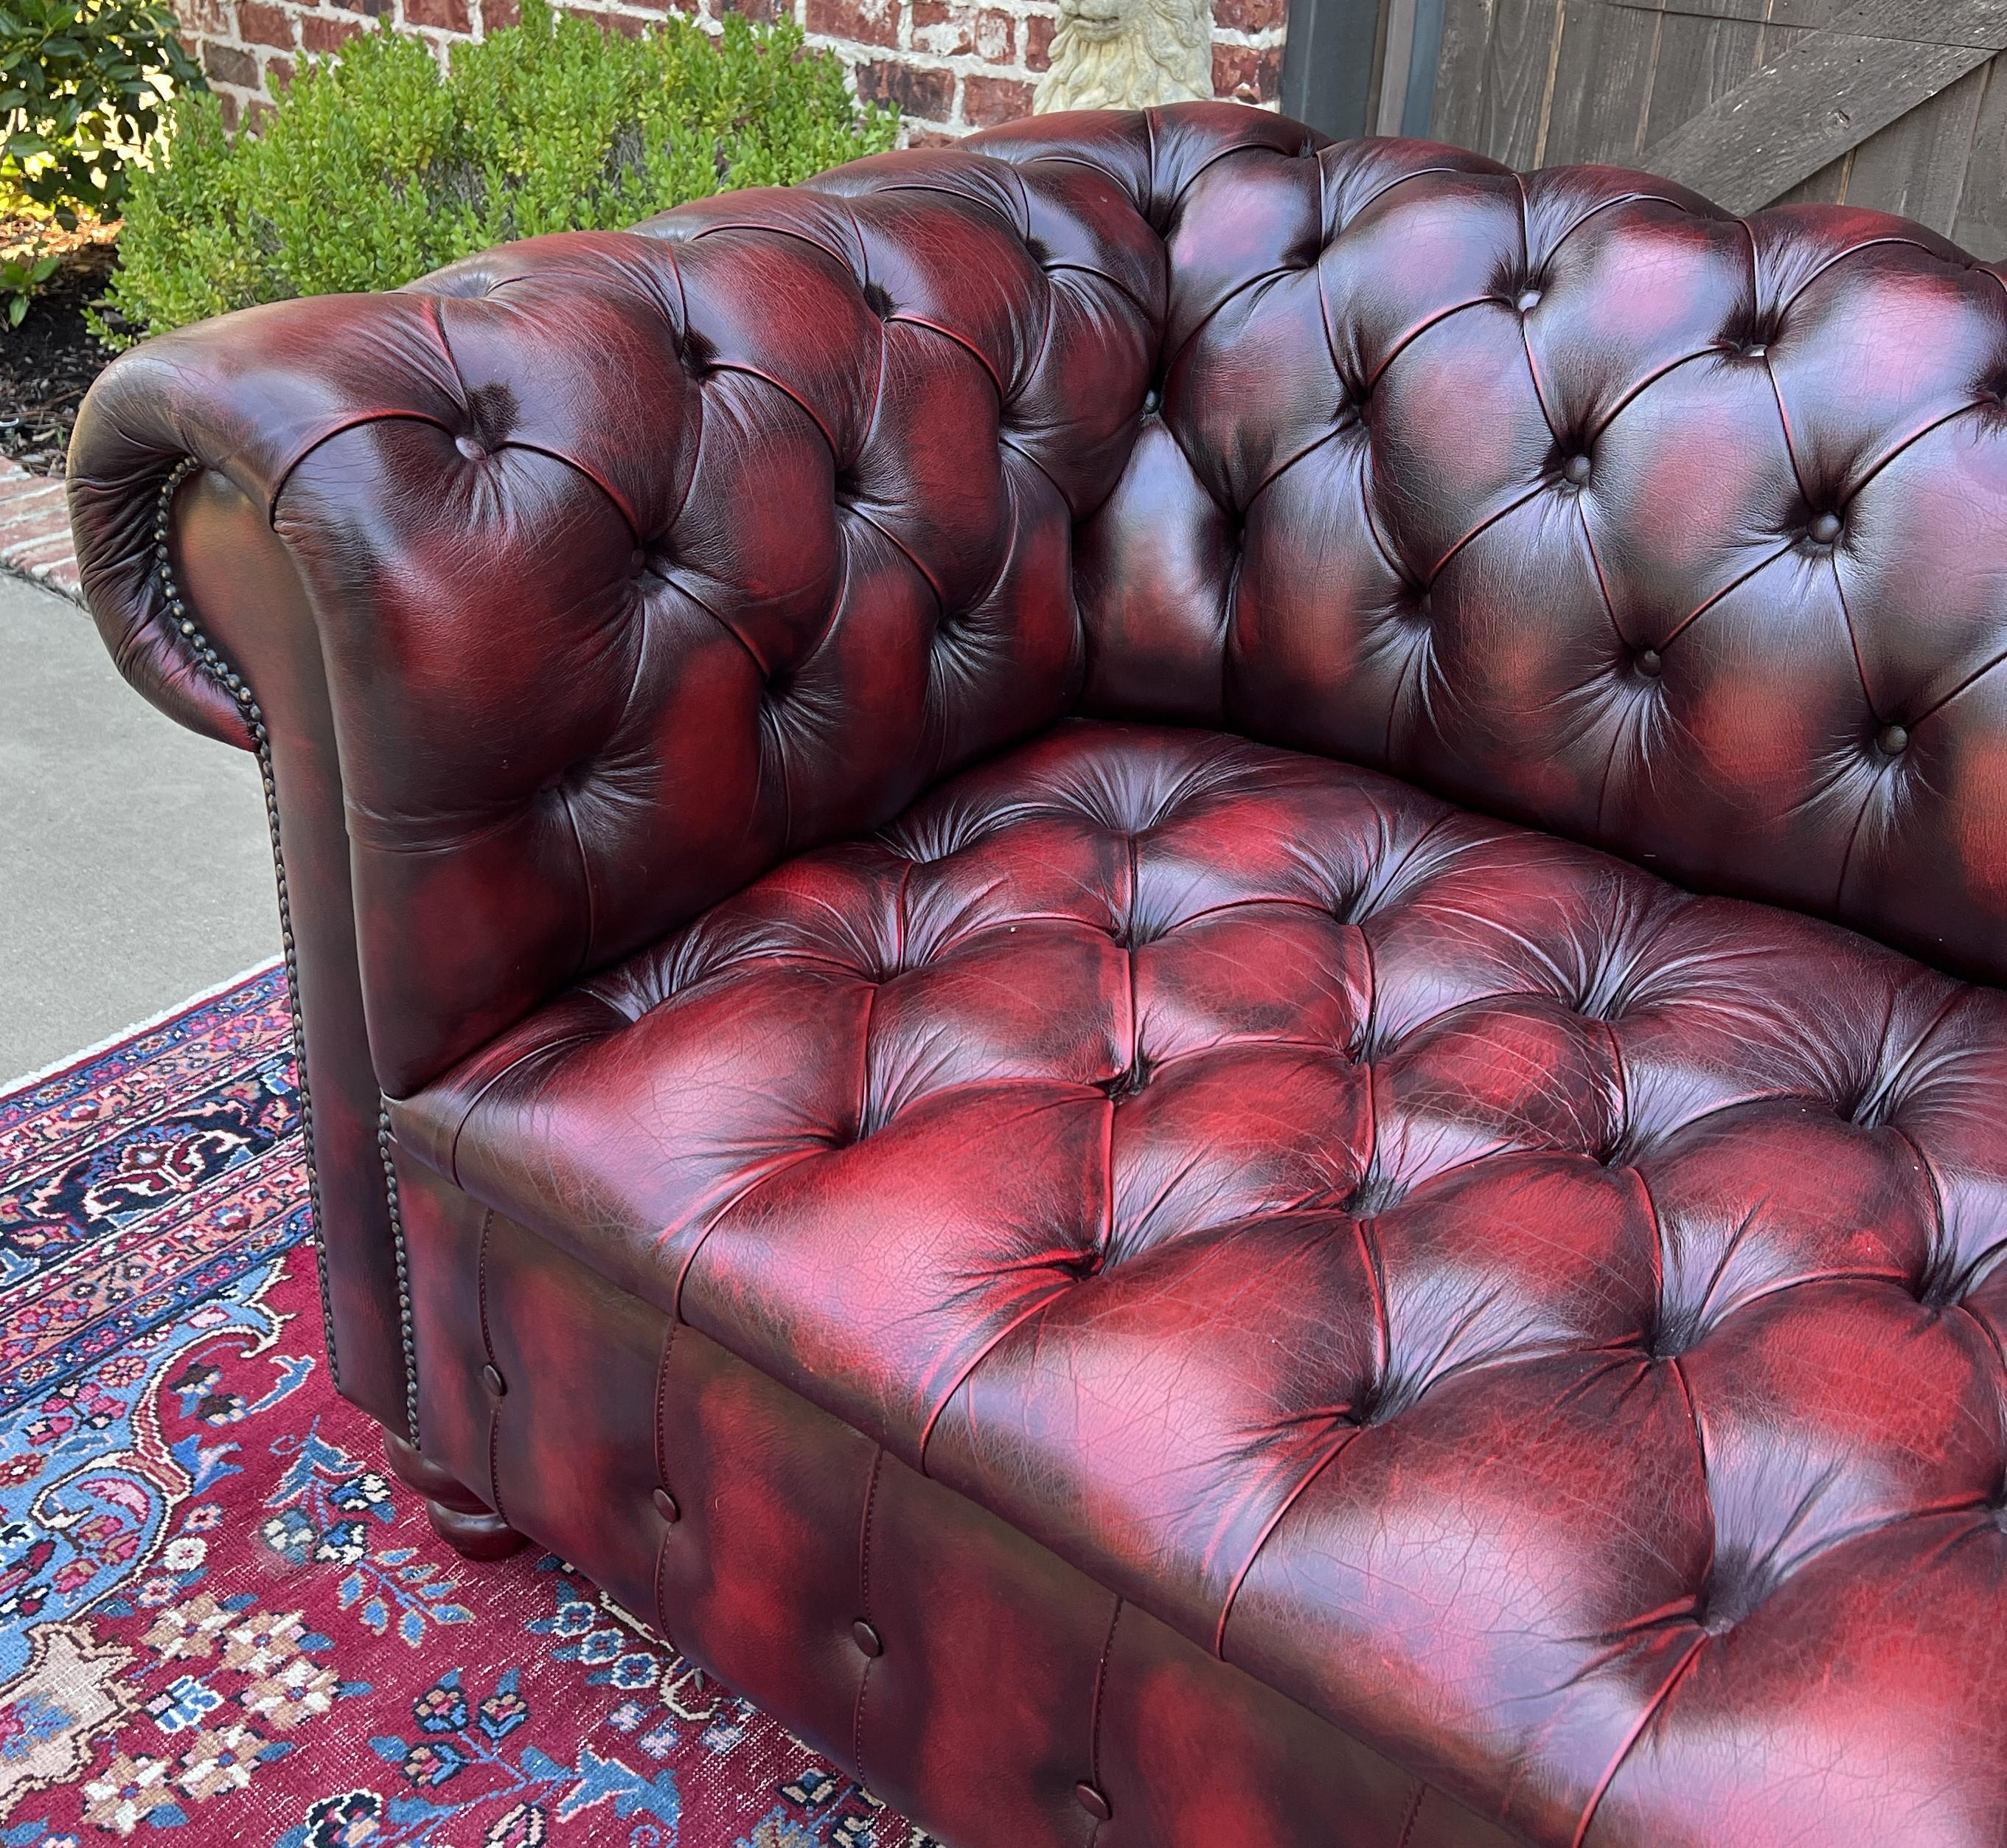 Vintage English Chesterfield Leather Sofa Tufted Seat Oxblood Red Mid-Century #2 5